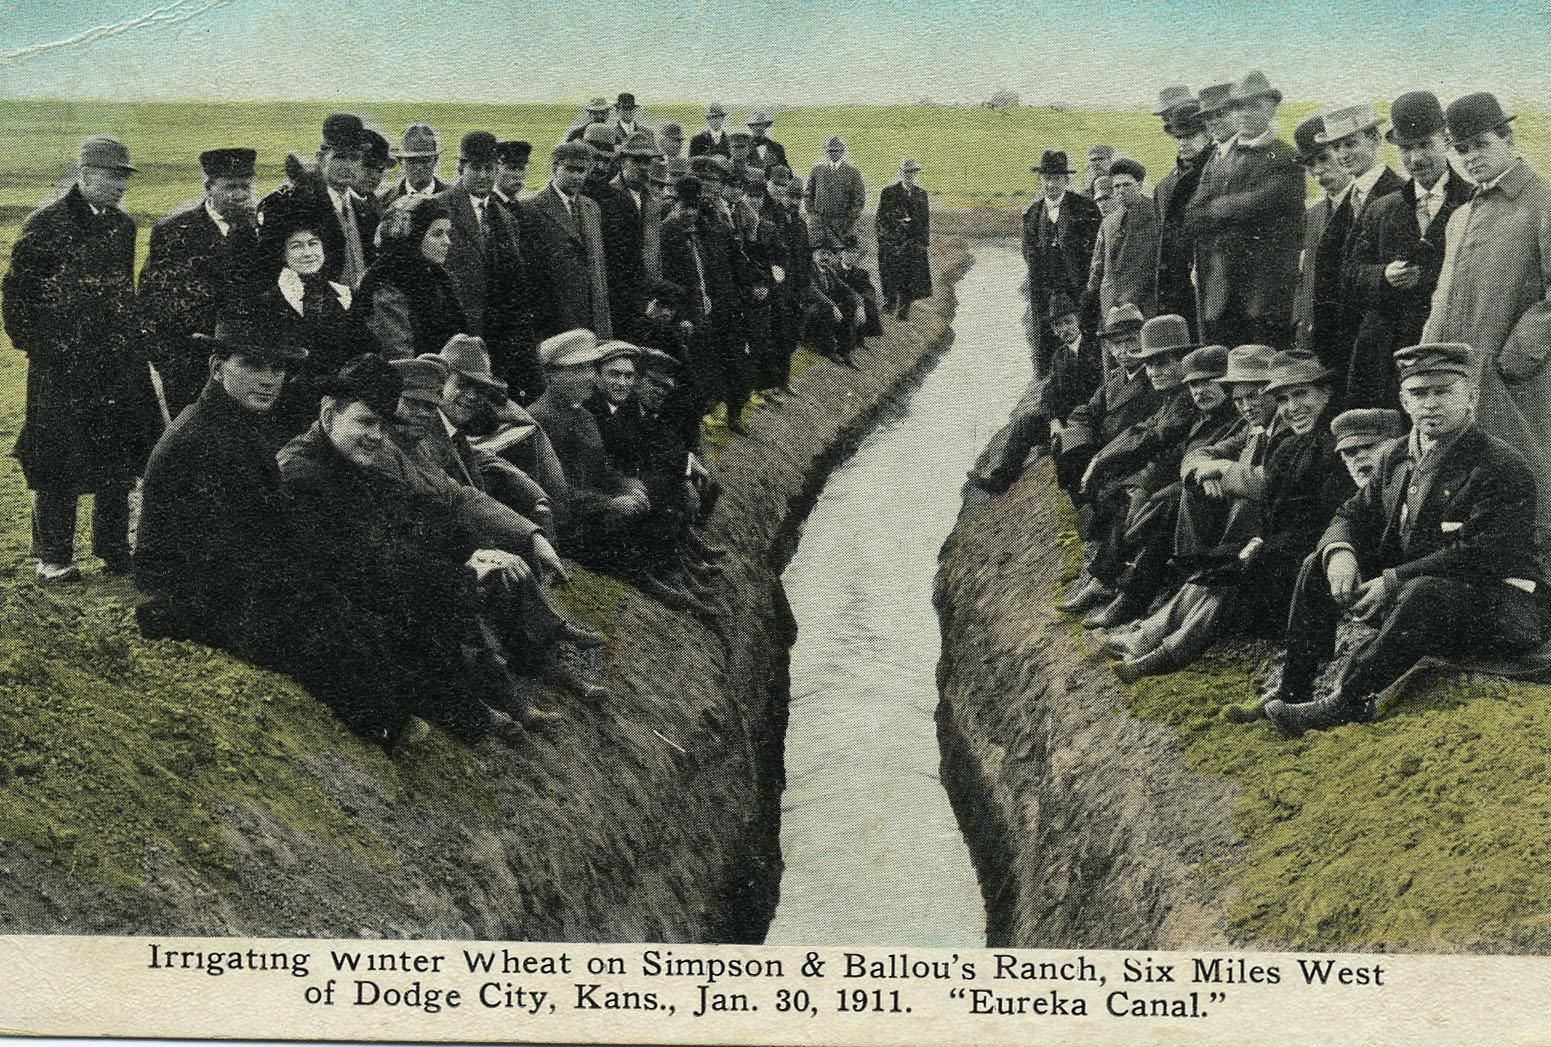 Townspeople of Dodge City stand on both sides of the Soule Canal, which has water in it - a rare site, 1911.